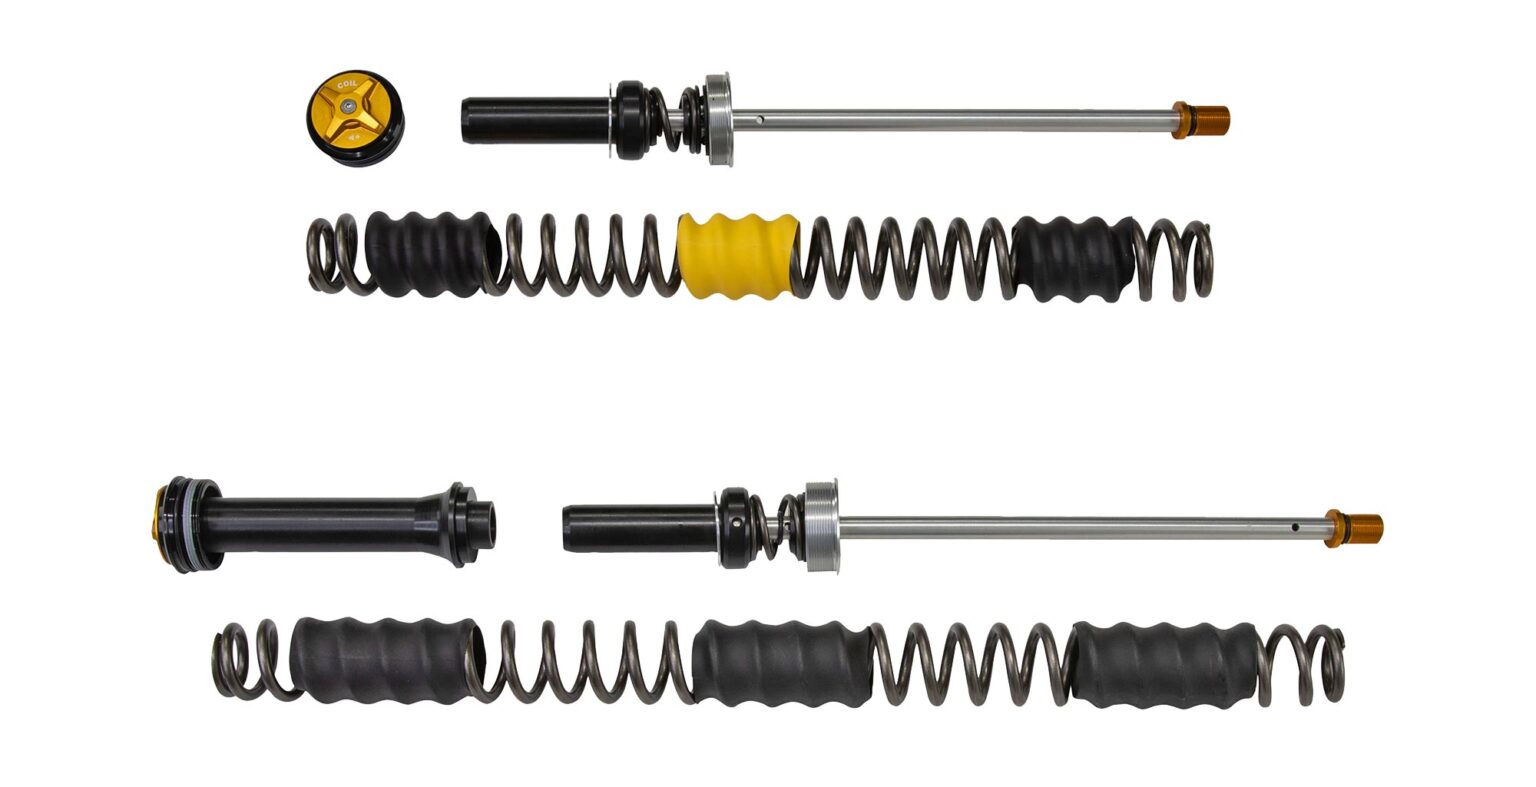 Öhlins RXF38 enduro & DH38 downhill fork coil kits, and coil forks